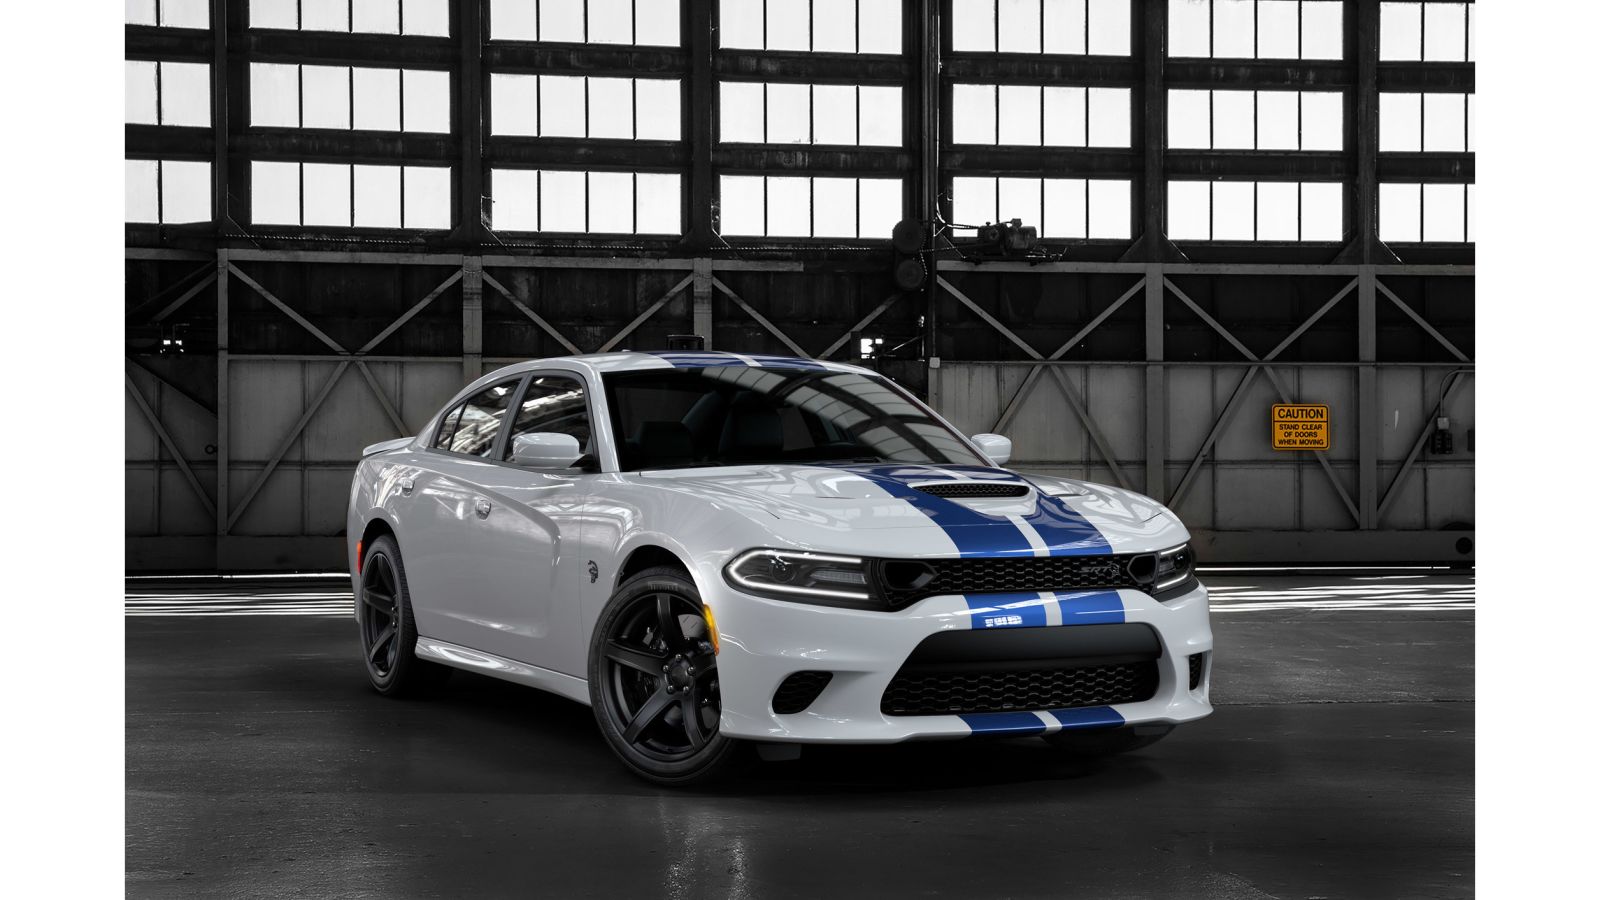 Illustration for article titled 2019 Charger Hellcat. Now with...stripes!